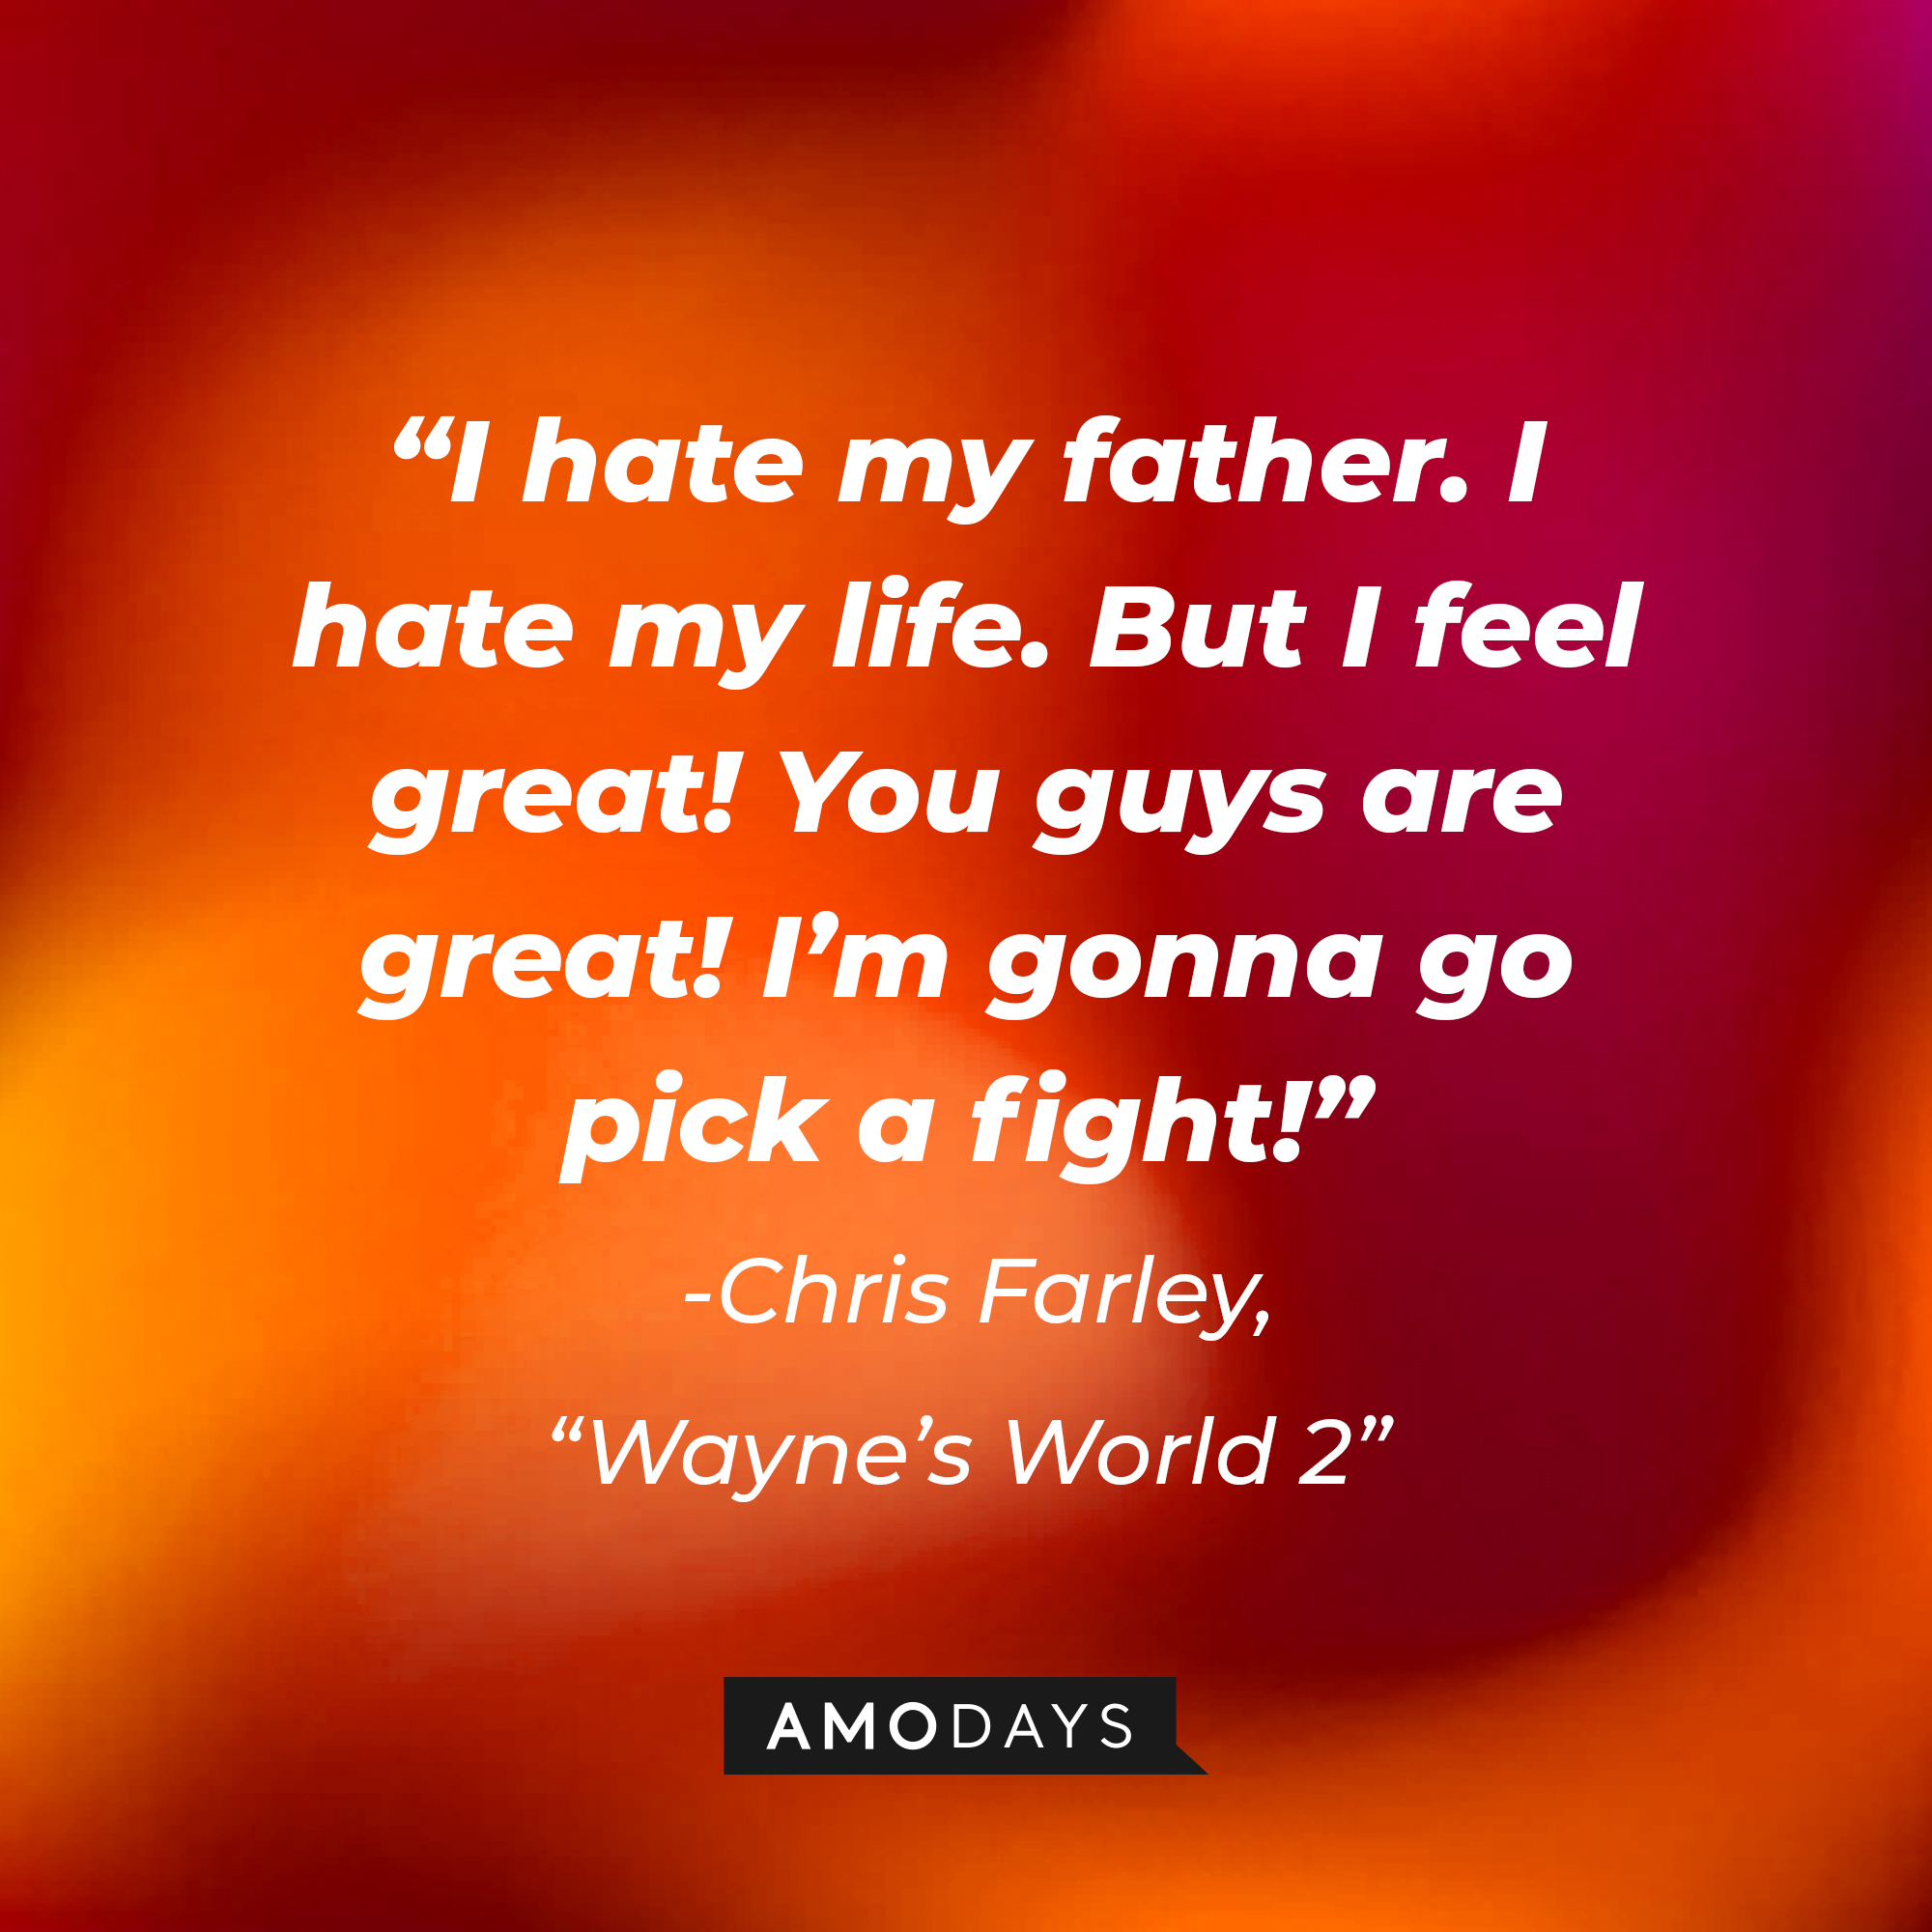 Chris Farley's "Wayne's World 2" quote: “I hate my father. I hate my life. But I feel great! You guys are great! I’m gonna go pick a fight!” | Source: Amodays